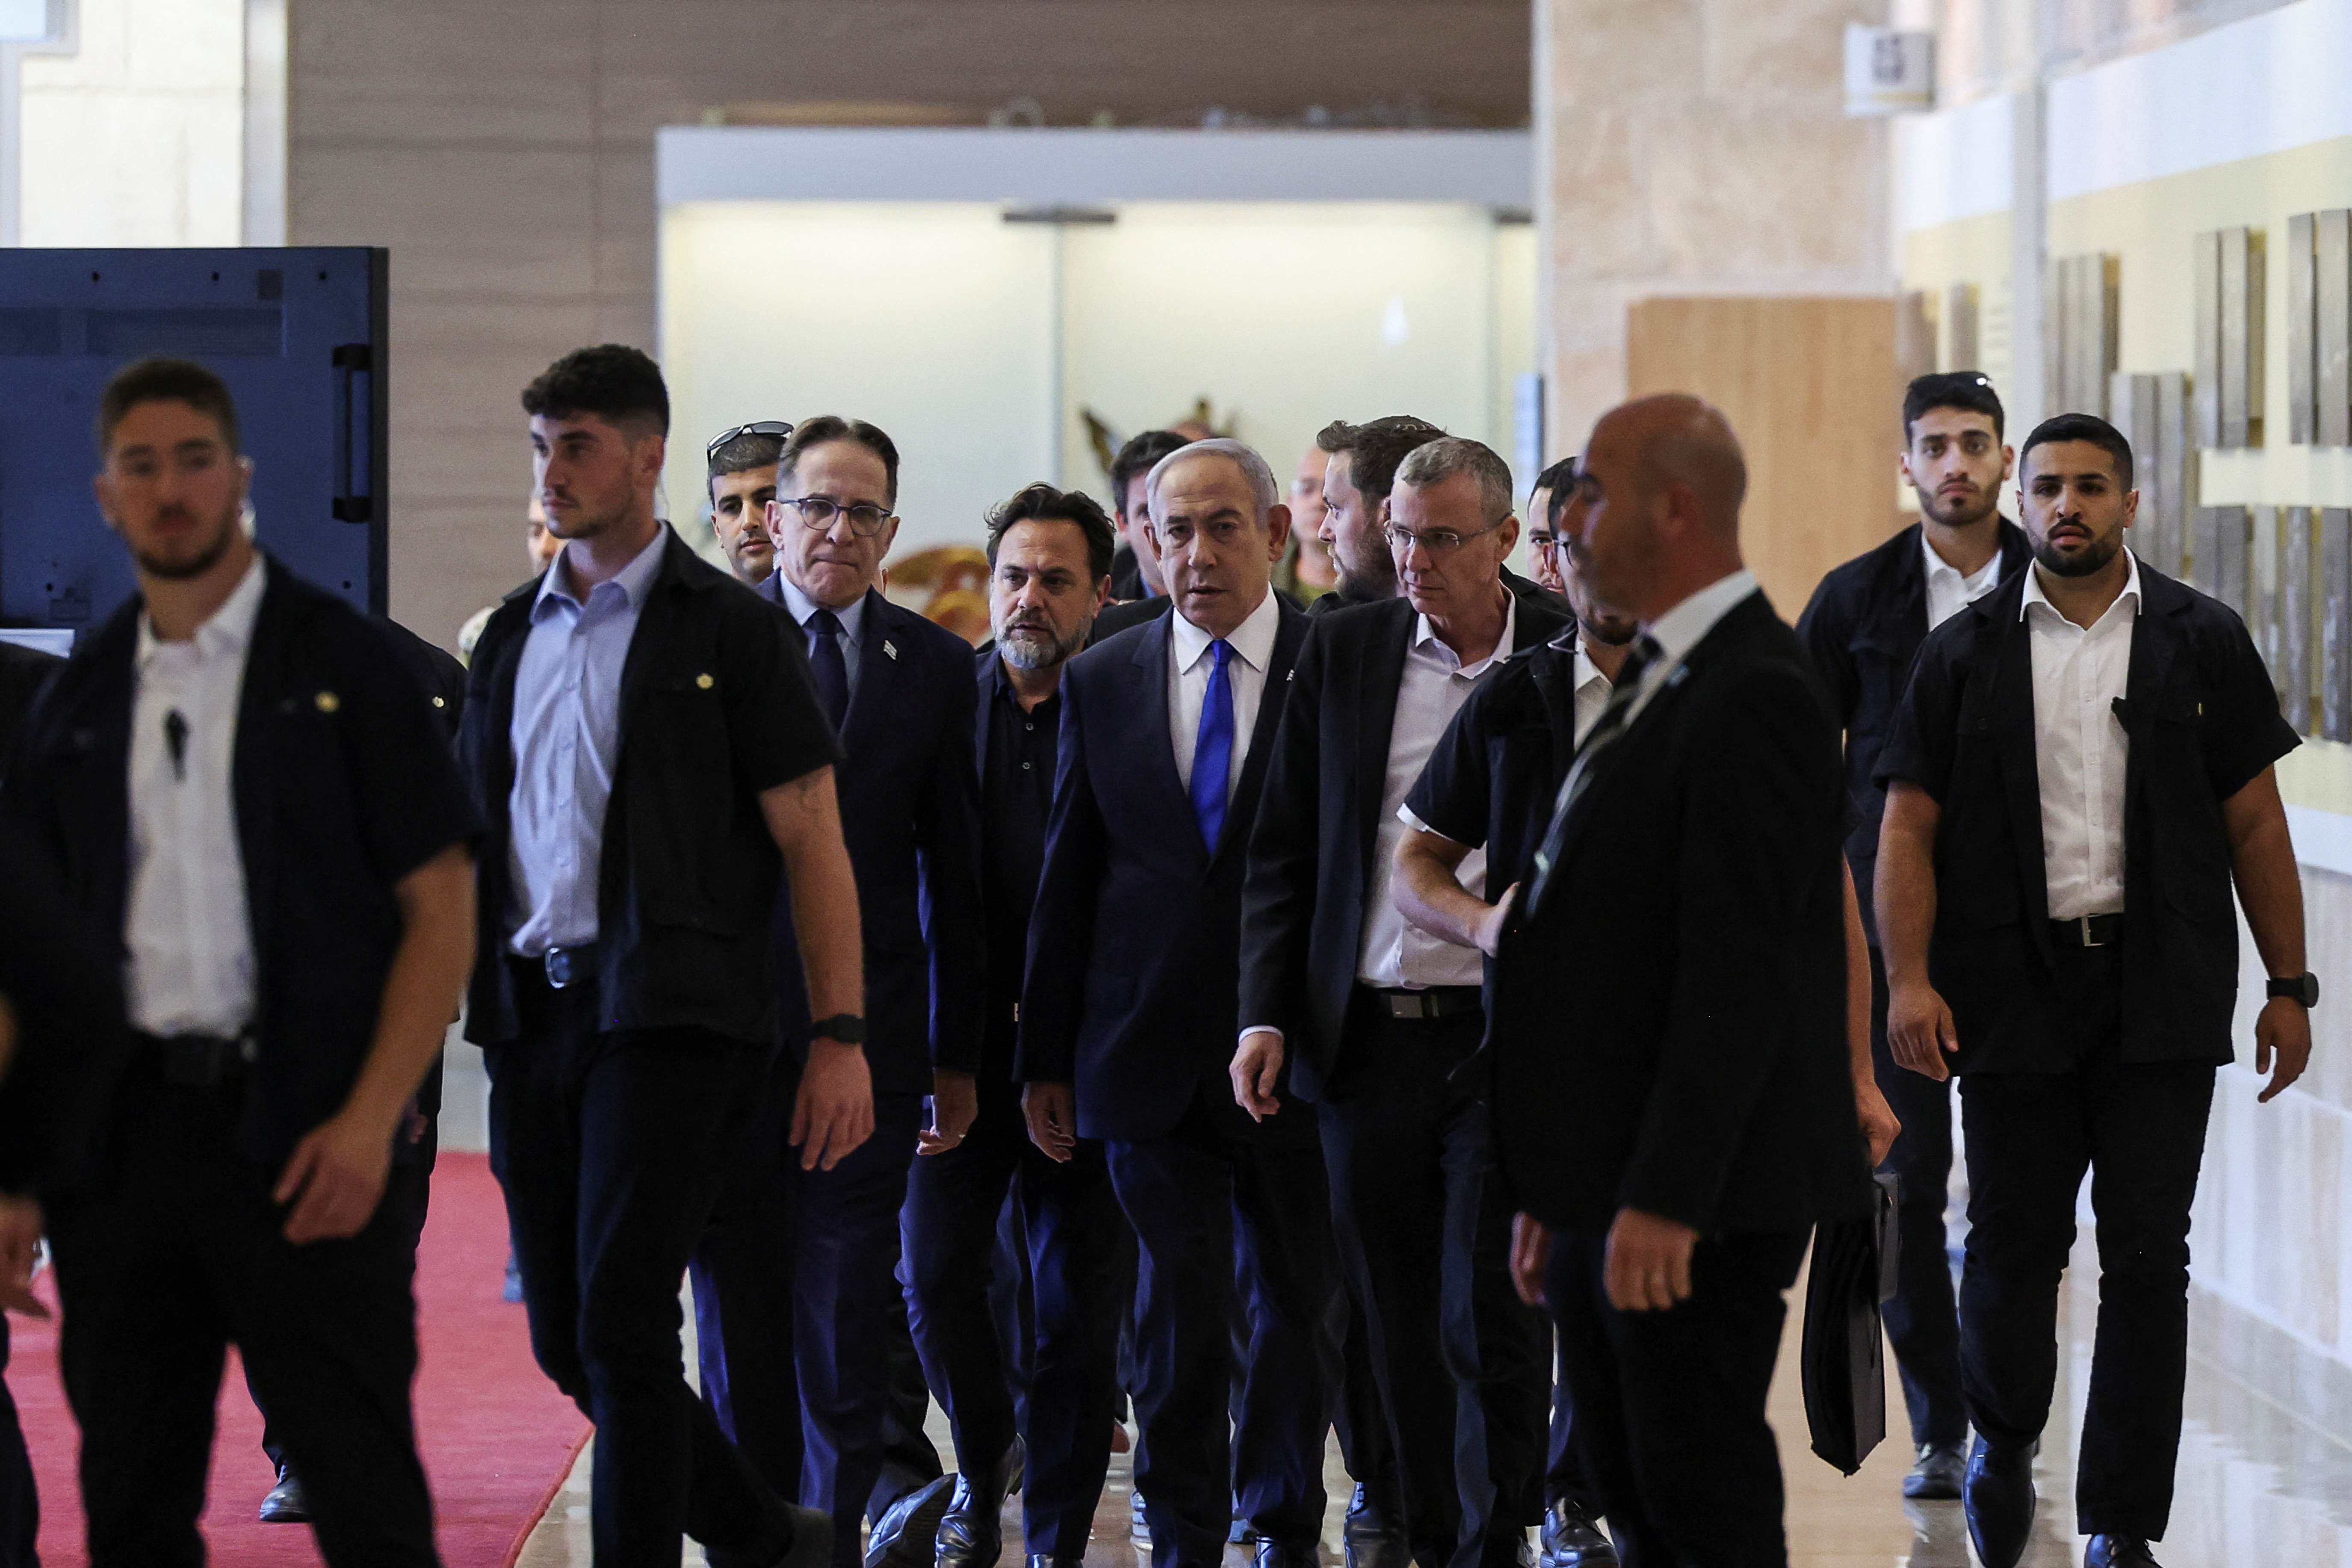 Israeli Prime Minister Netanyahu arrives to his Likud party faction meeting at the Knesset,in Jerusalem